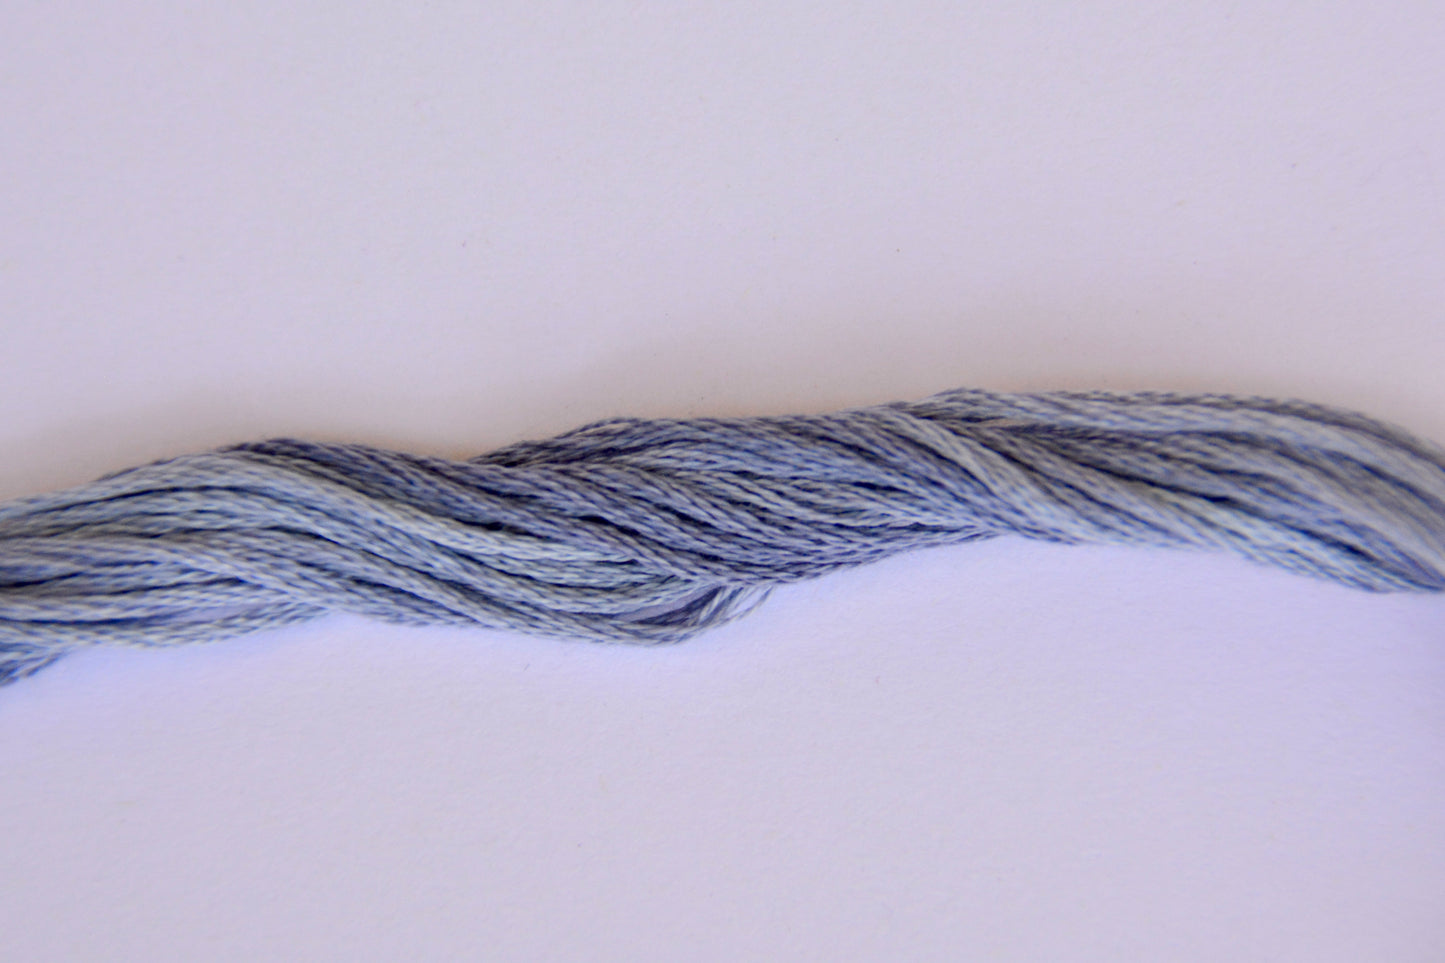 Blue Moon Classic Colorworks 6-Strand Hand-Dyed Embroidery Floss